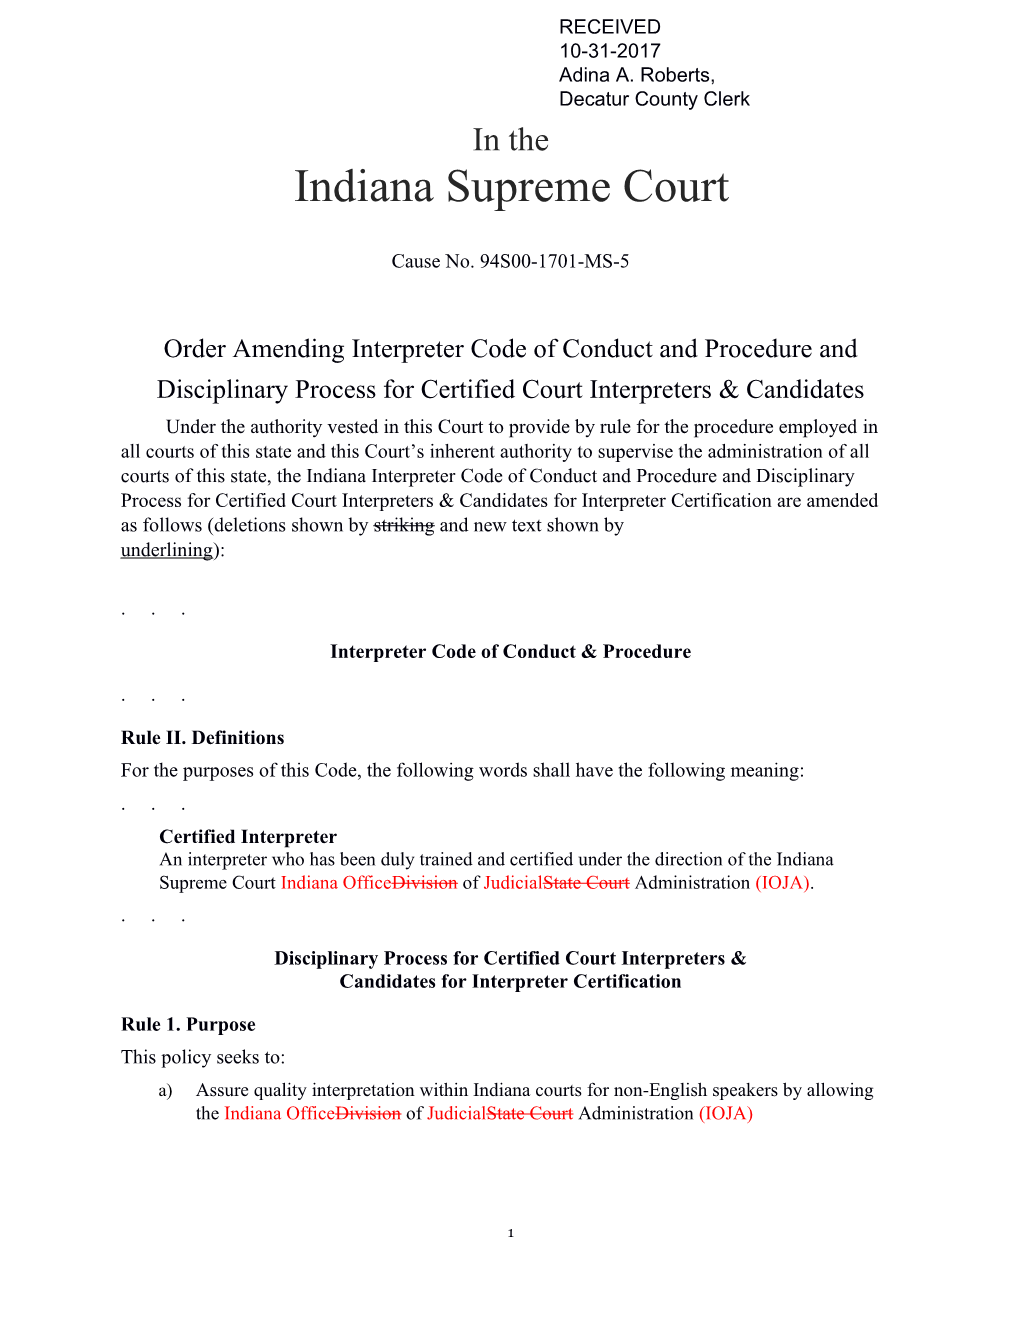 Order Amending Interpreter Code of Conduct and Procedure And